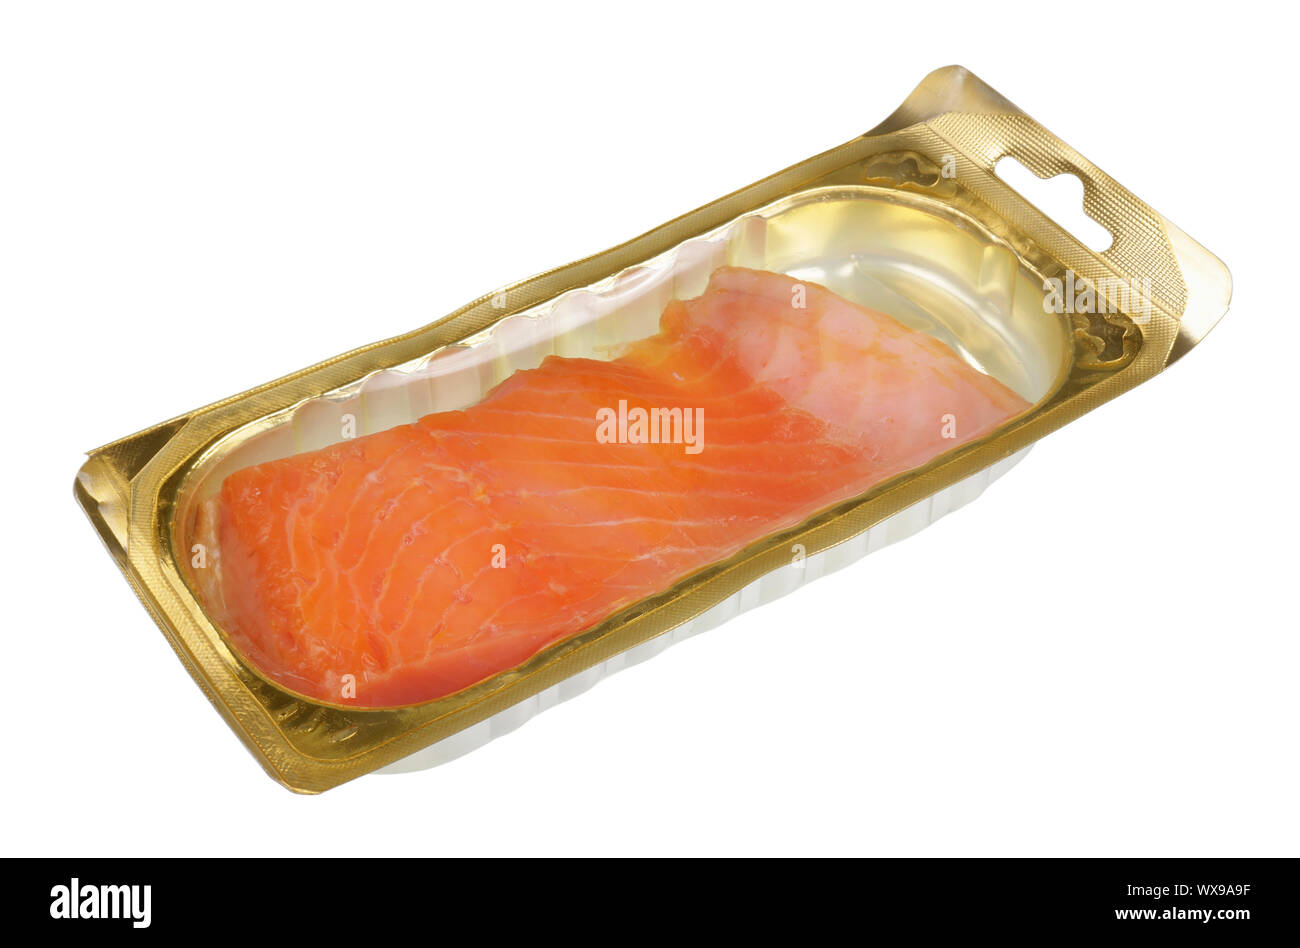 Smoked salmon fillet in sealed standard plastic packaging isolated Stock Photo